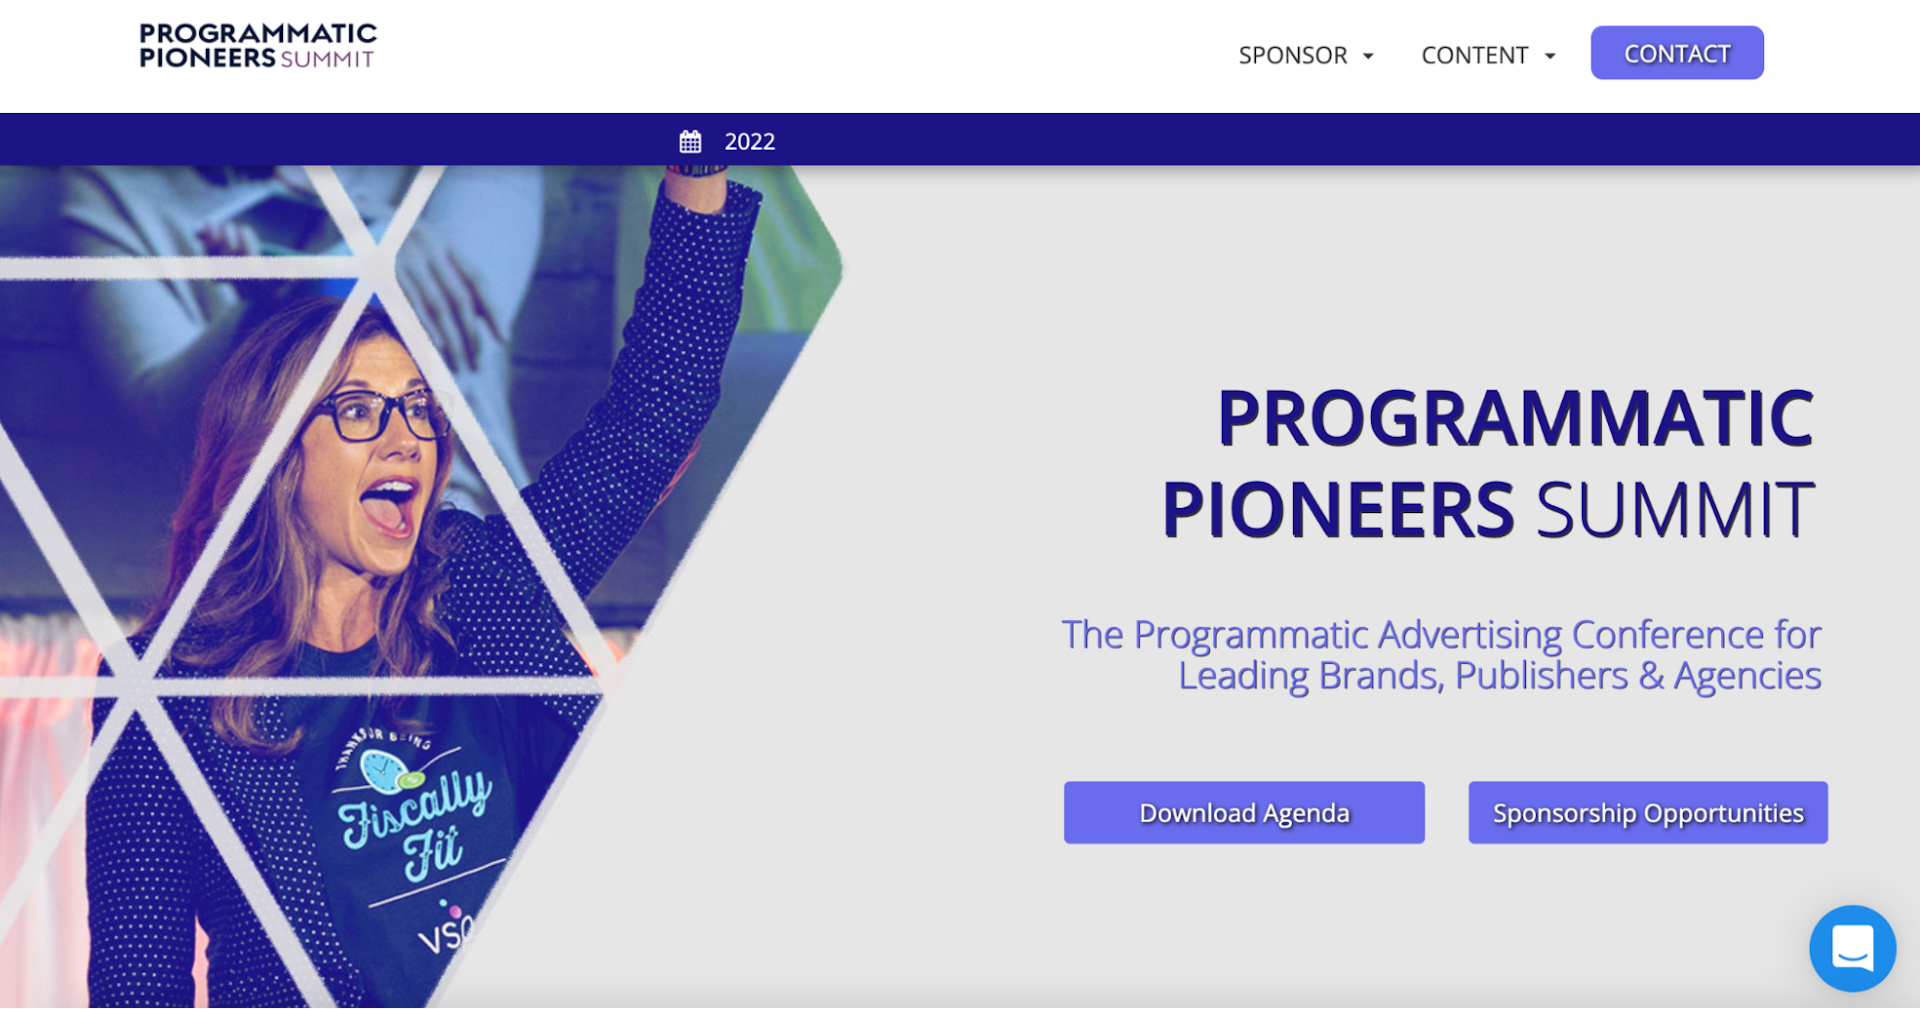 Event page for the Programmatic Pioneers Summit